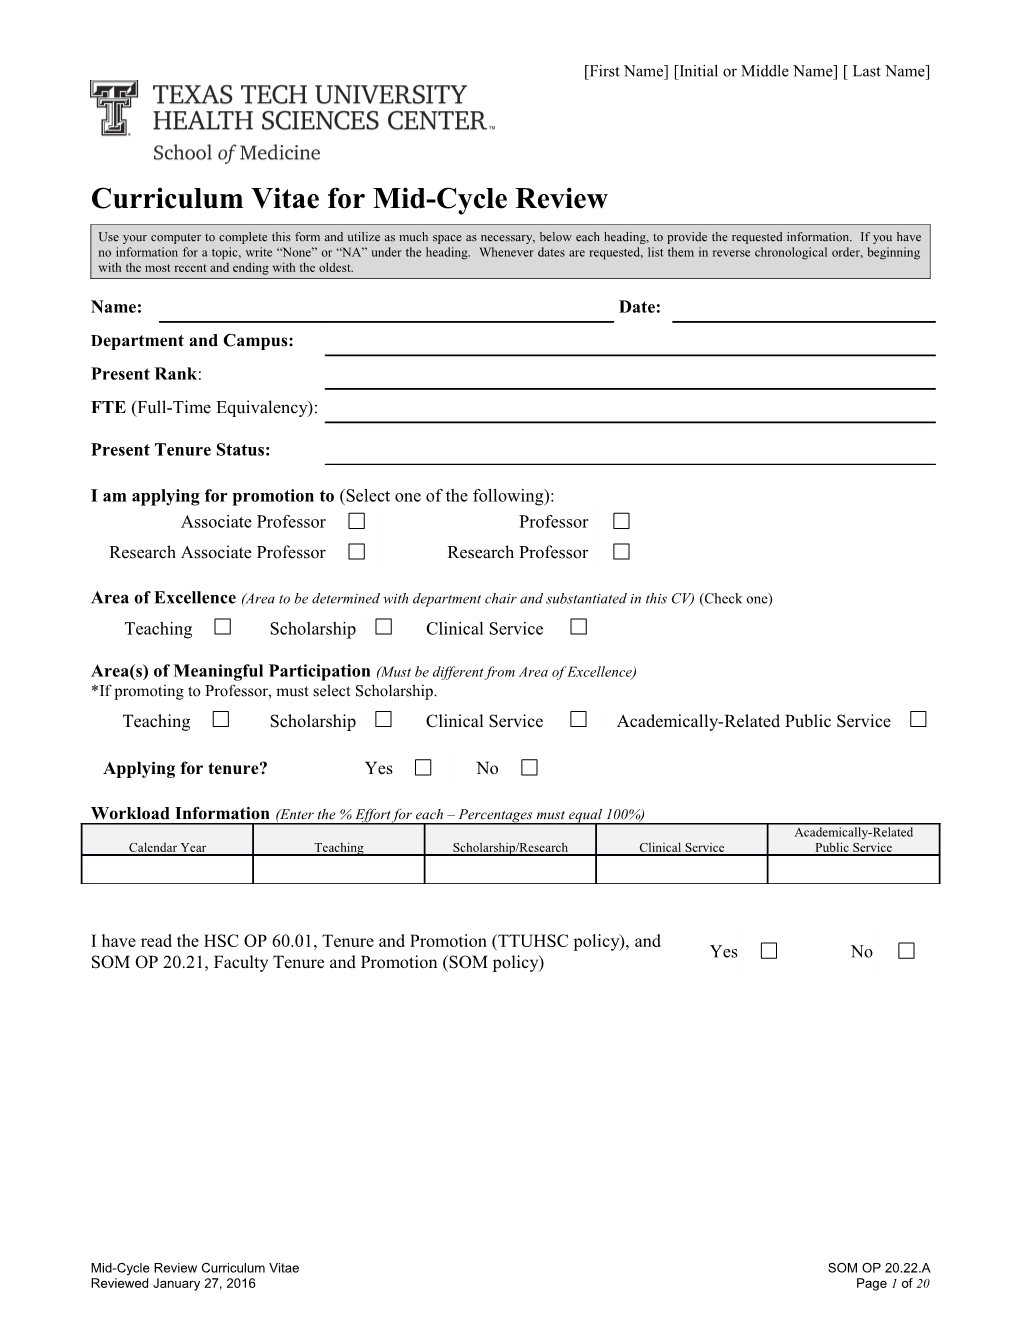 Mid-Cycle Review Curriculum Vitae - January 27, 2016